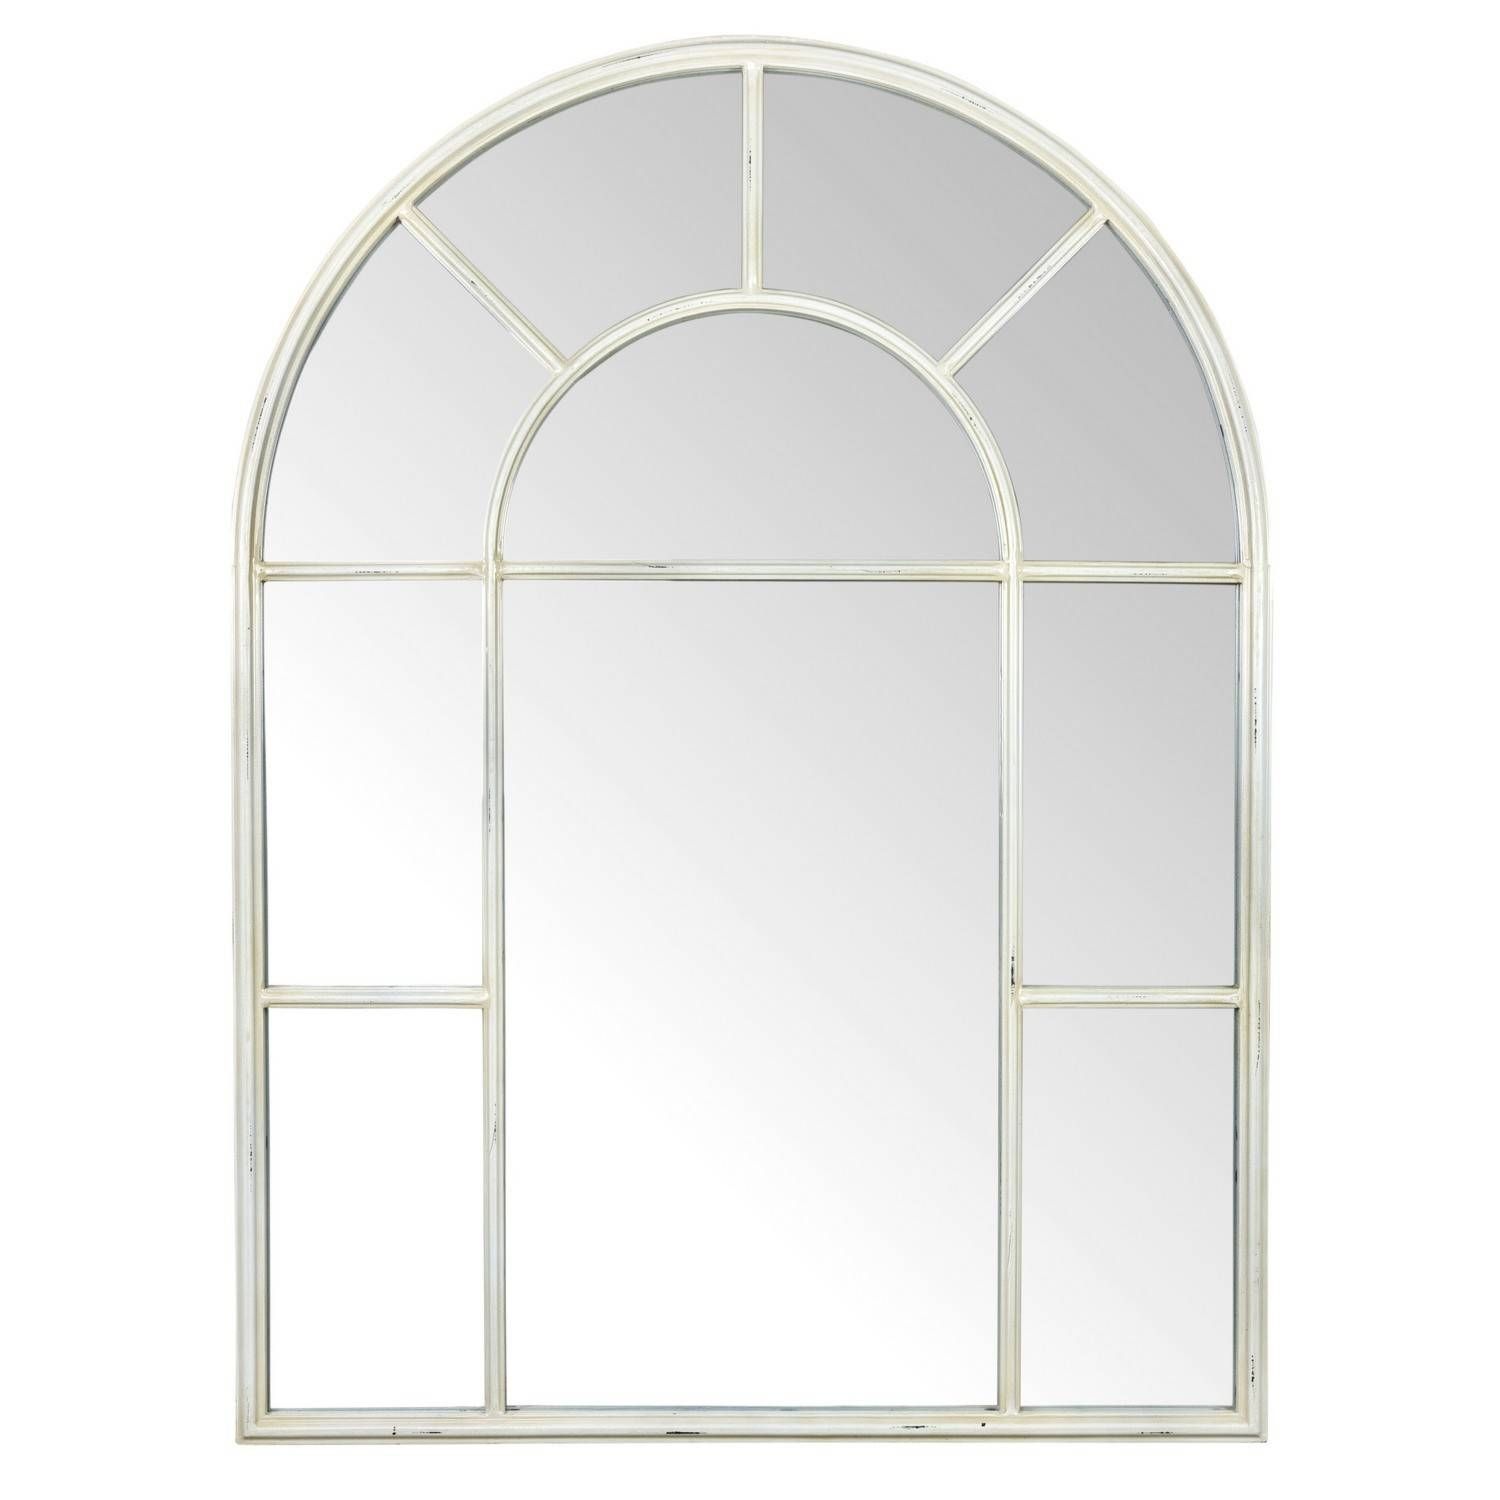 Ivory Arch Mirror Intended For Arched Mirrors (View 25 of 25)